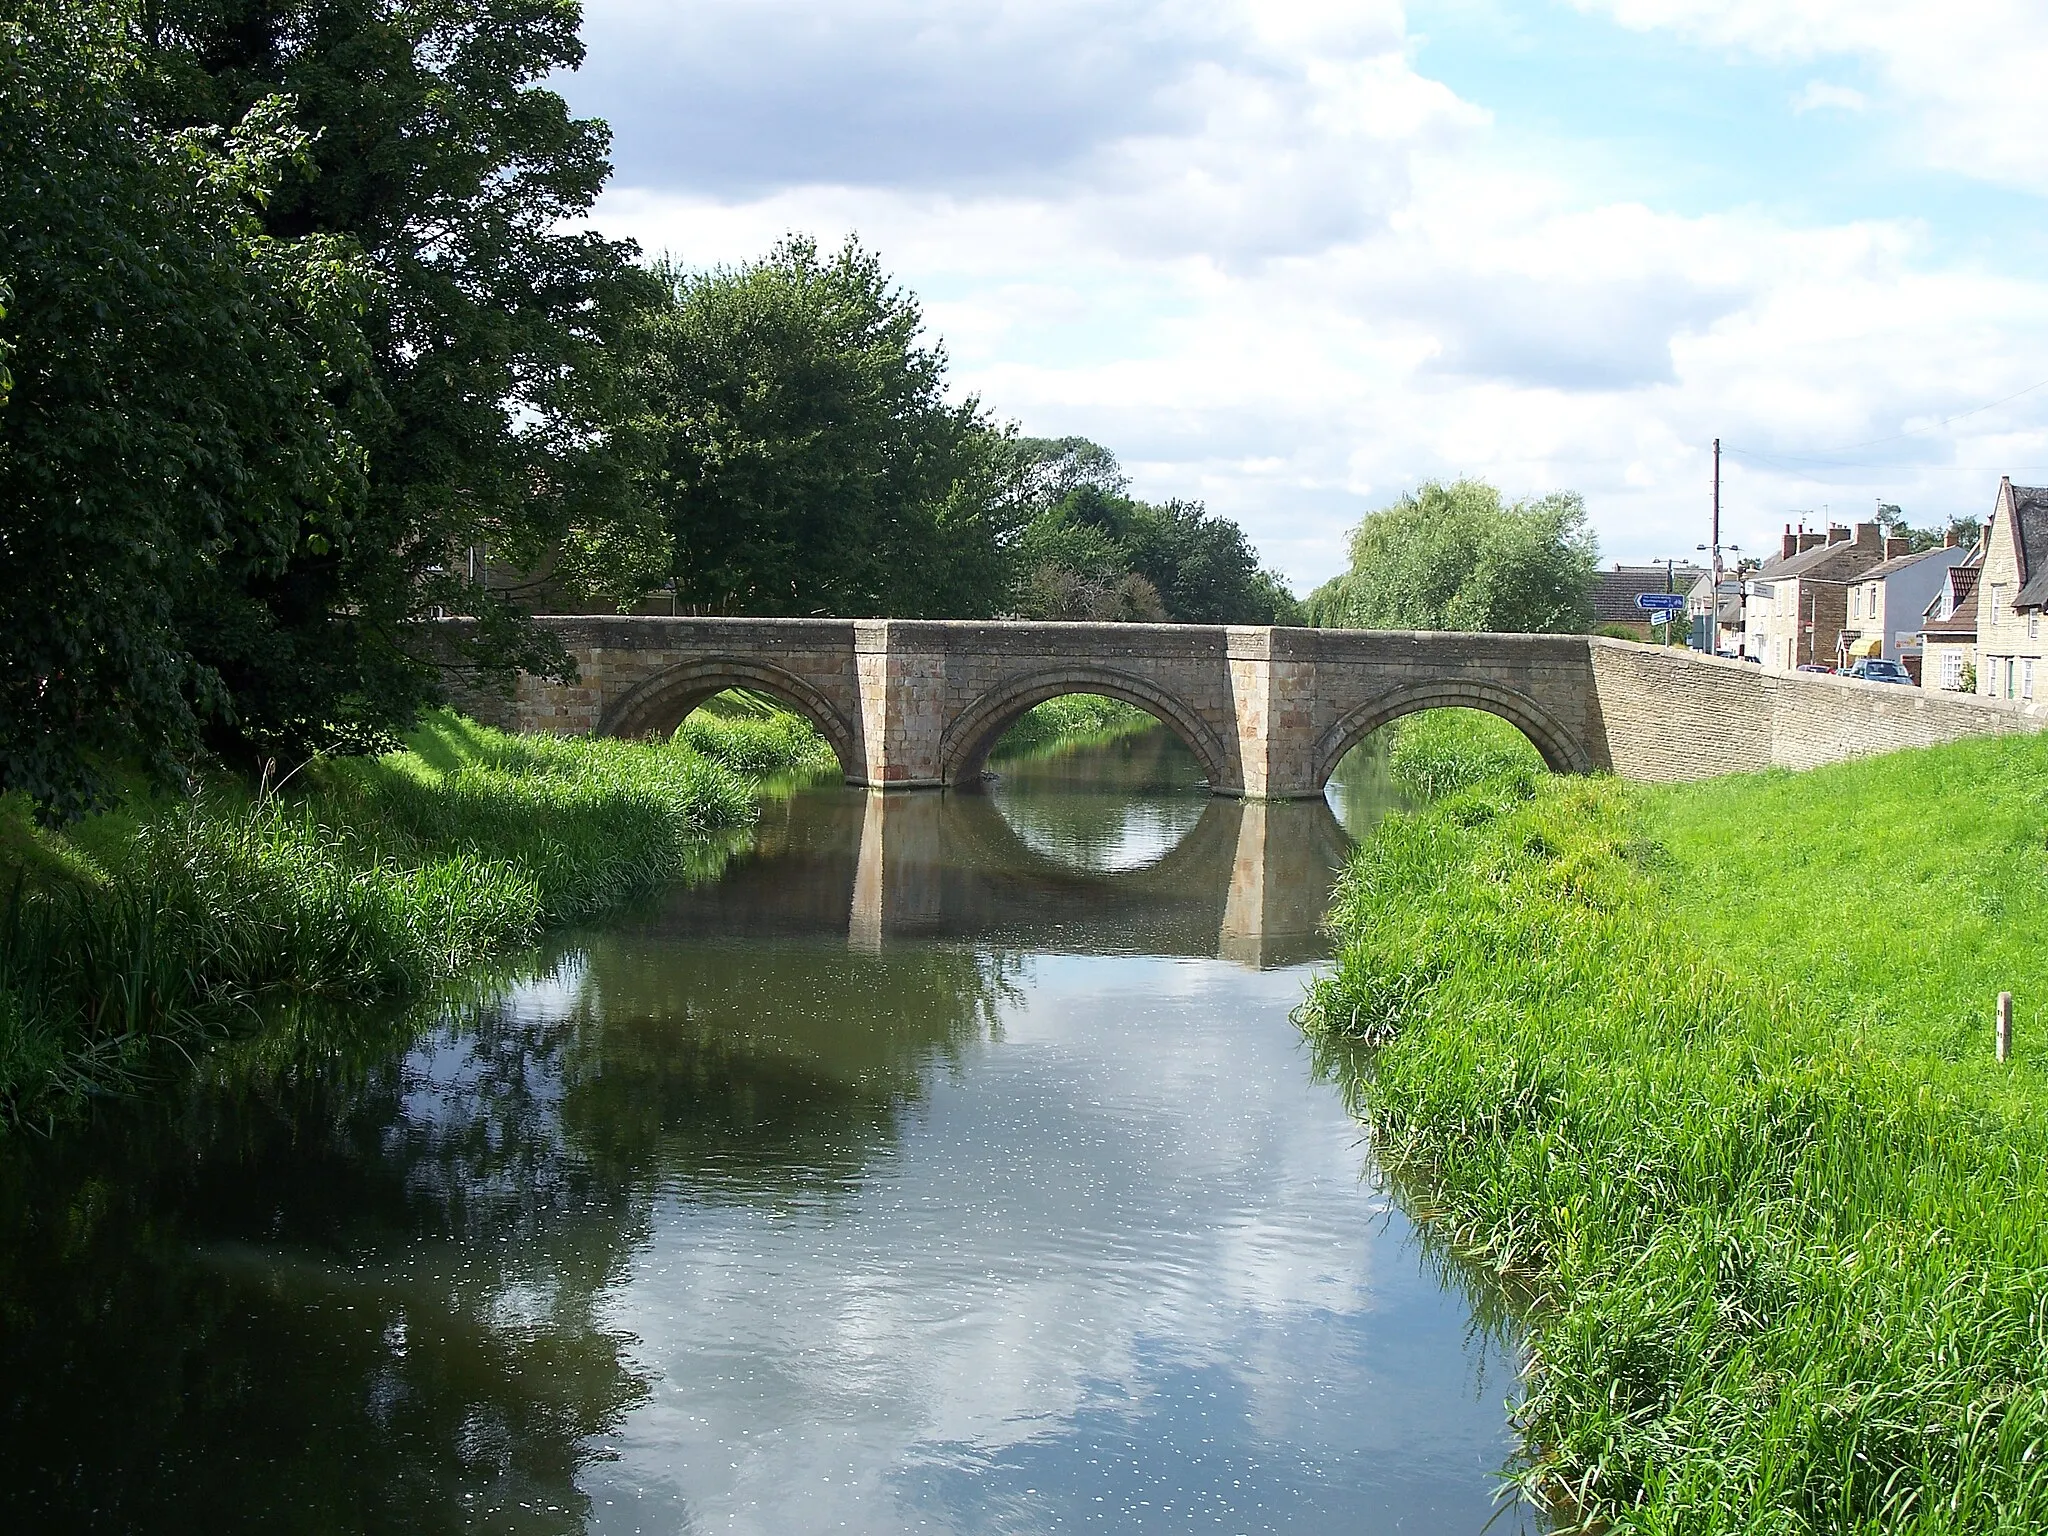 Photo showing: The old bridge across the River Welland, England, between Deeping Gate and Deeping St James, photo taken by user:lofty